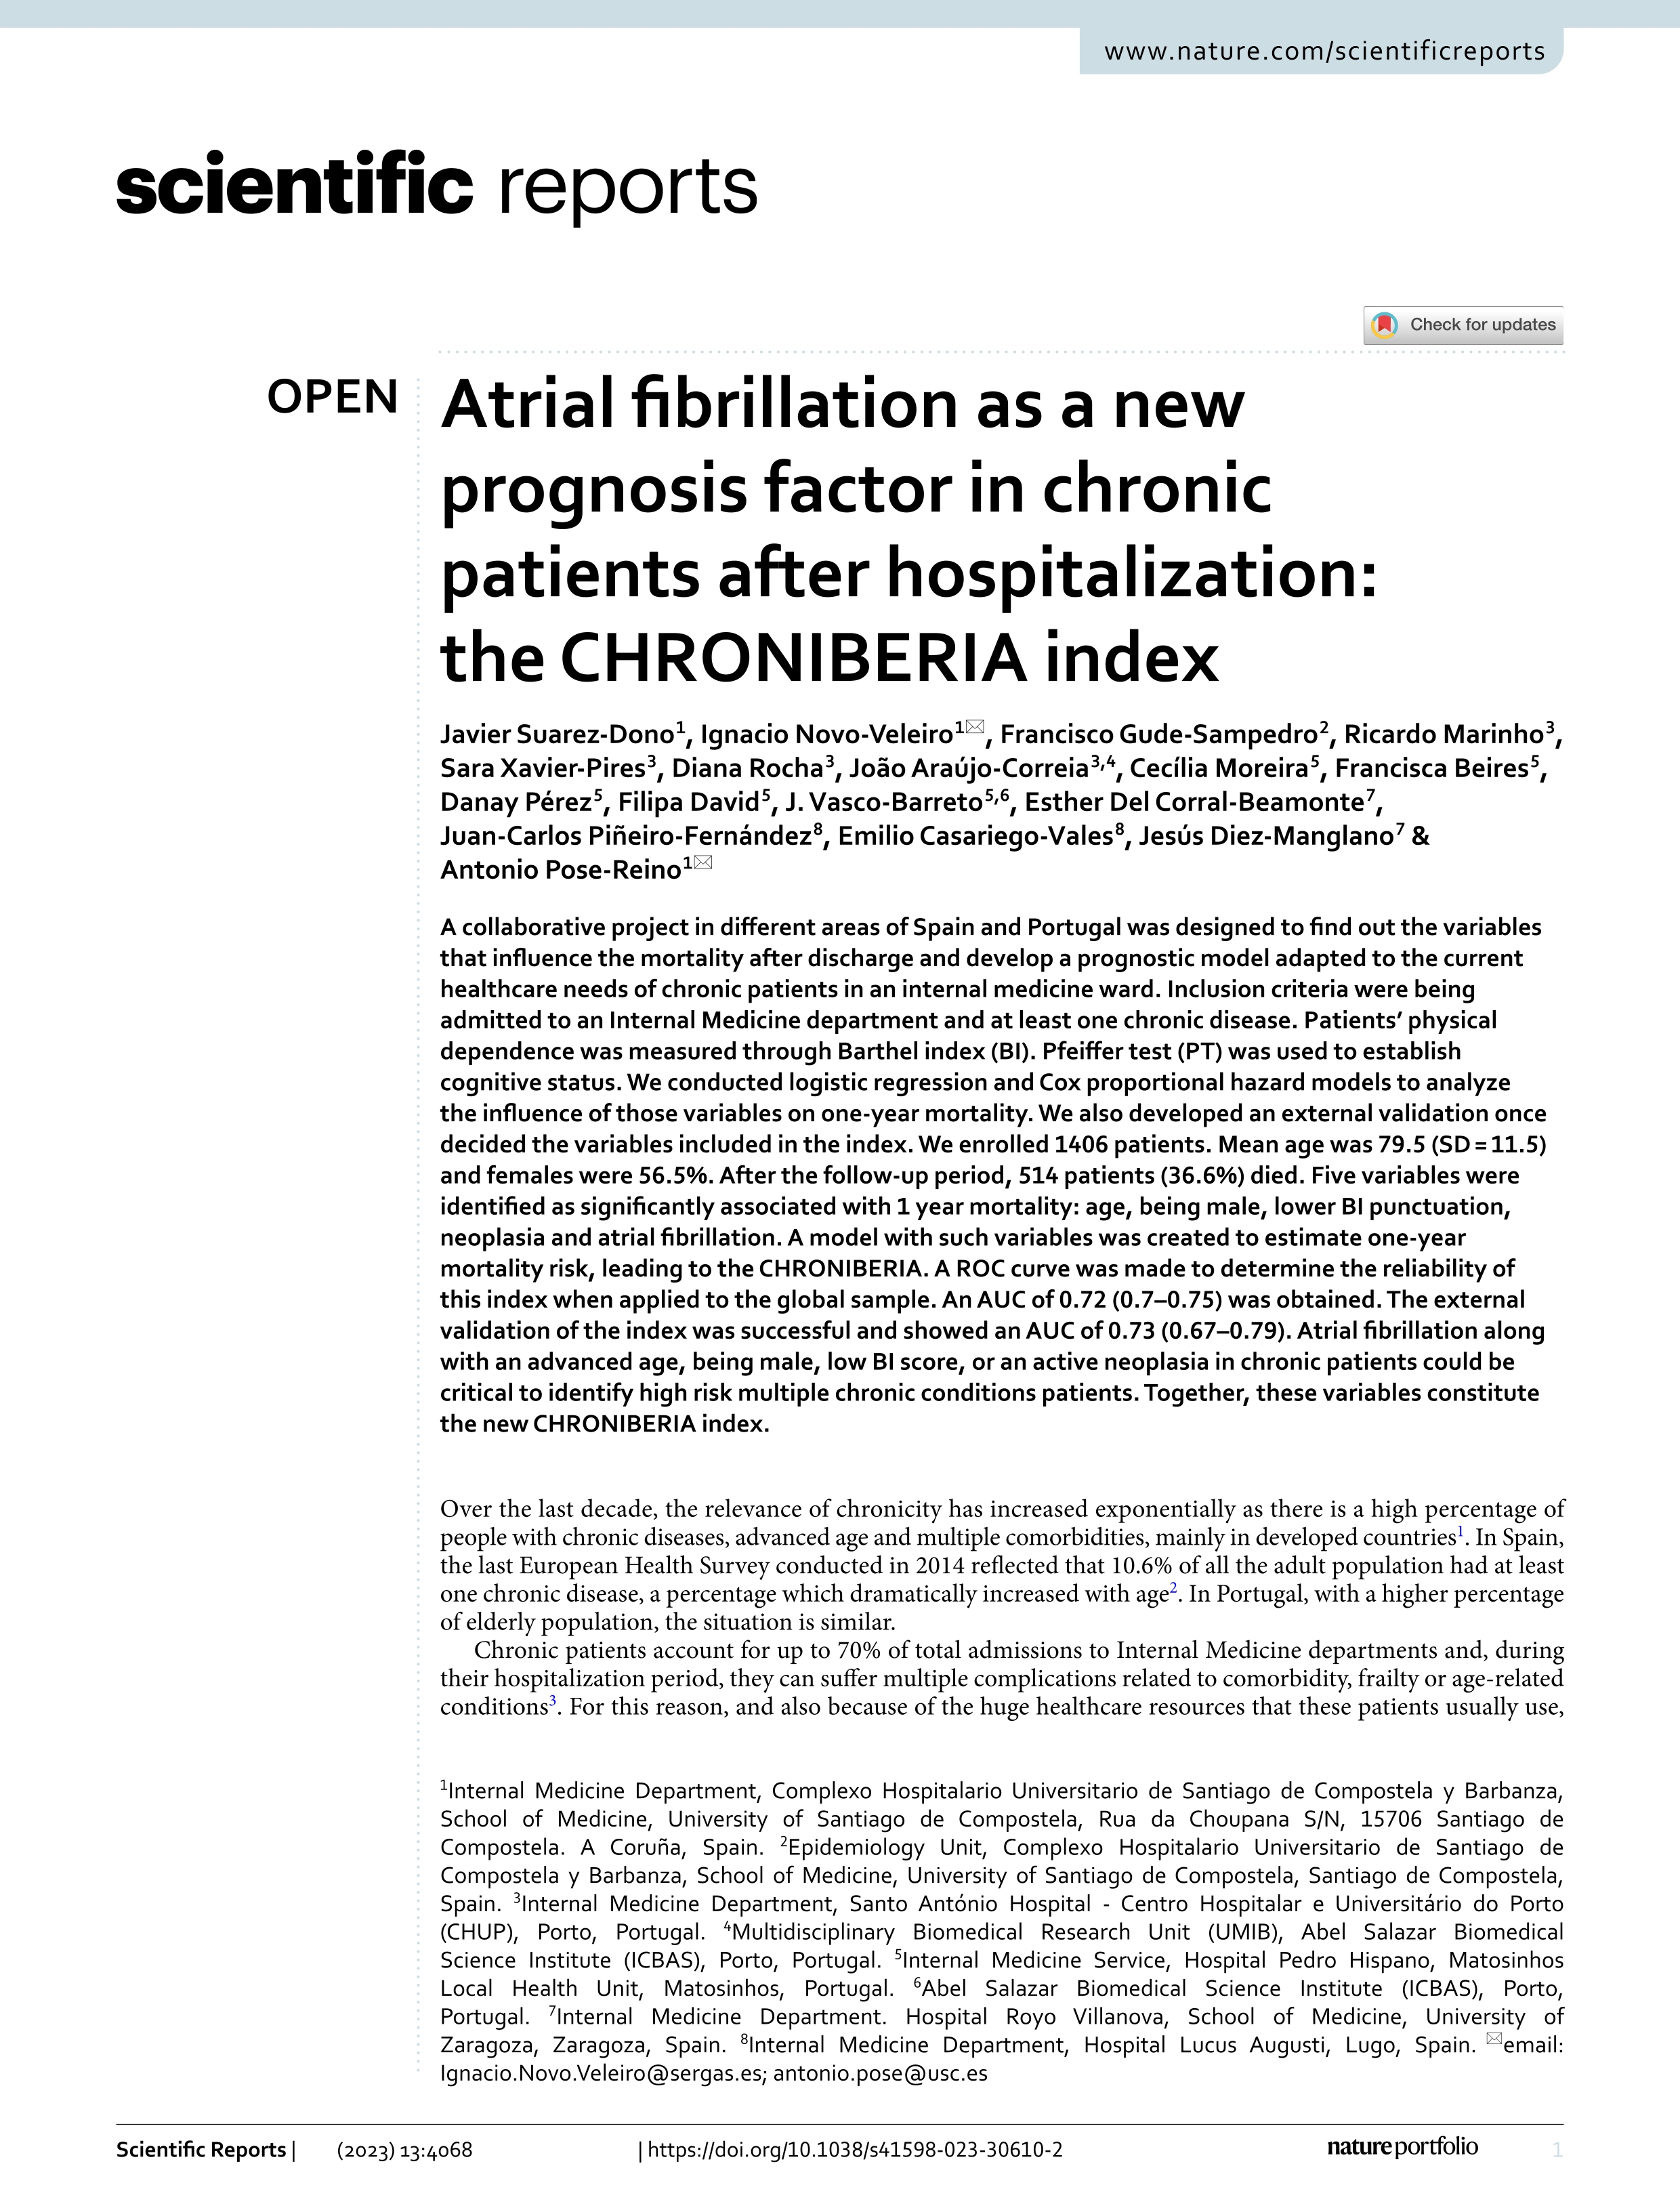 Atrial fibrillation as a new prognosis factor in chronic patients after hospitalization: the CHRONIBERIA index